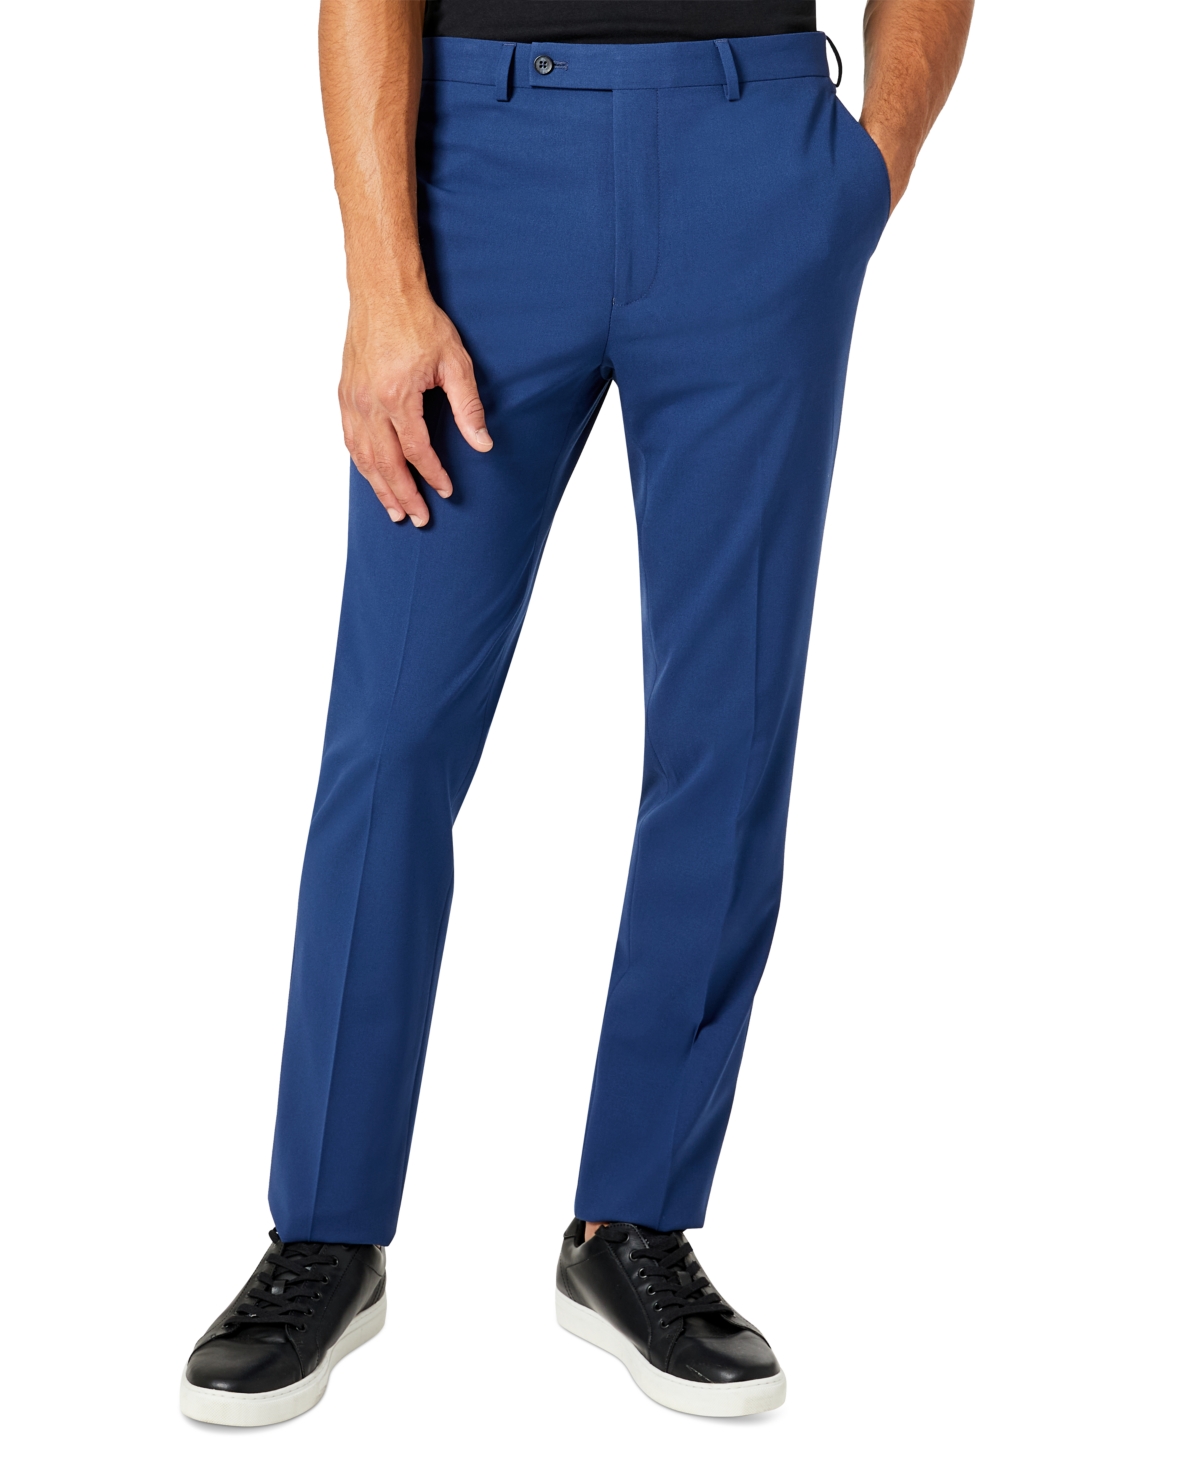 Dkny Men's Modern-fit Stretch Suit Separate Pants In Blue Solid